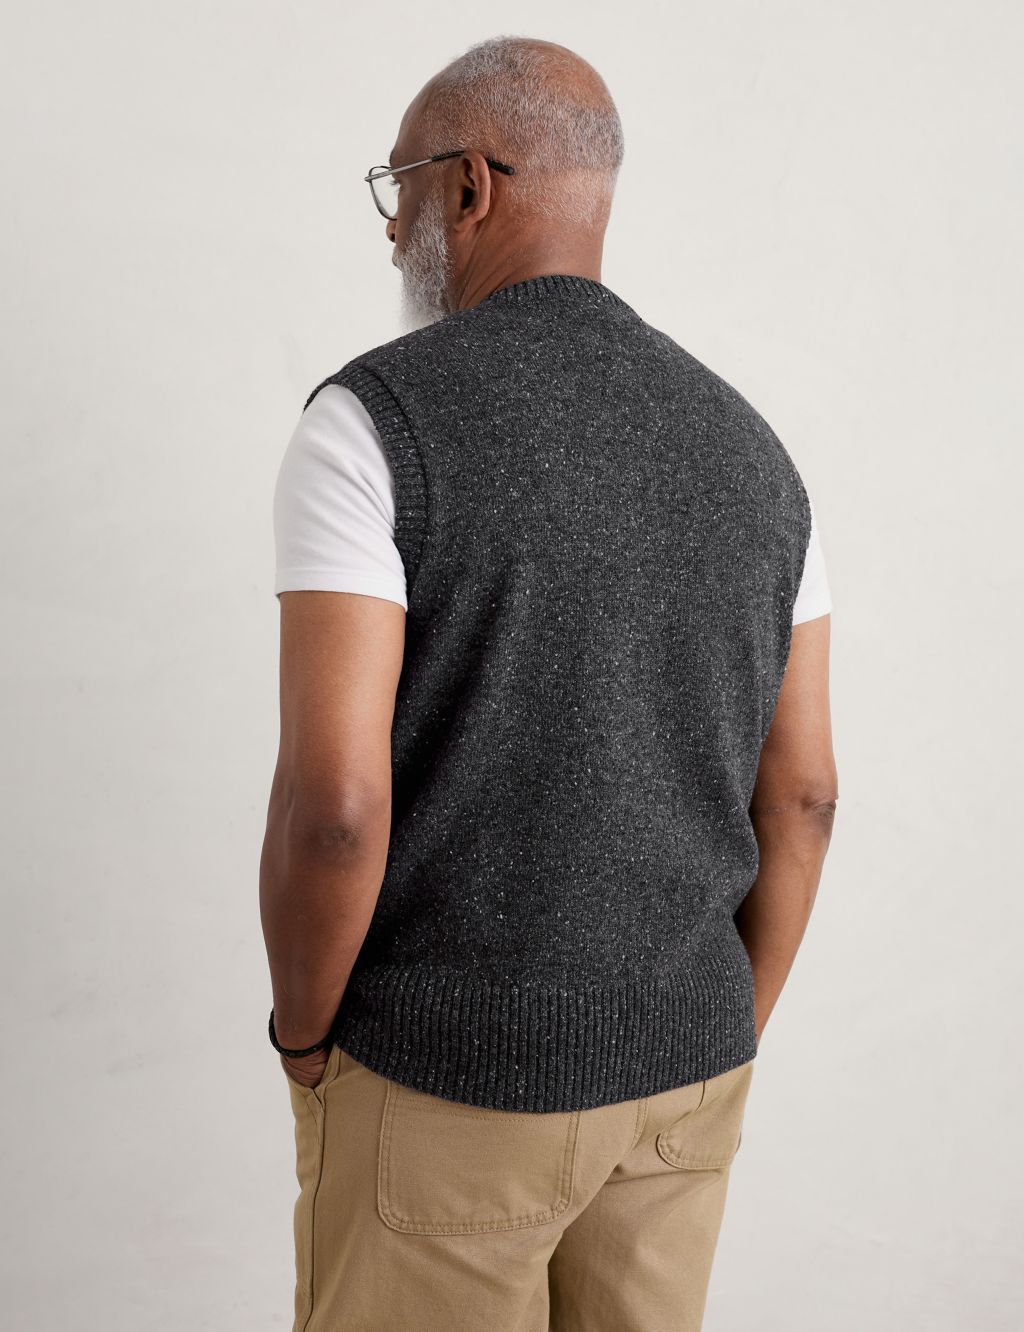 Lambswool Rich Textured V-Neck Knitted Vest image 4